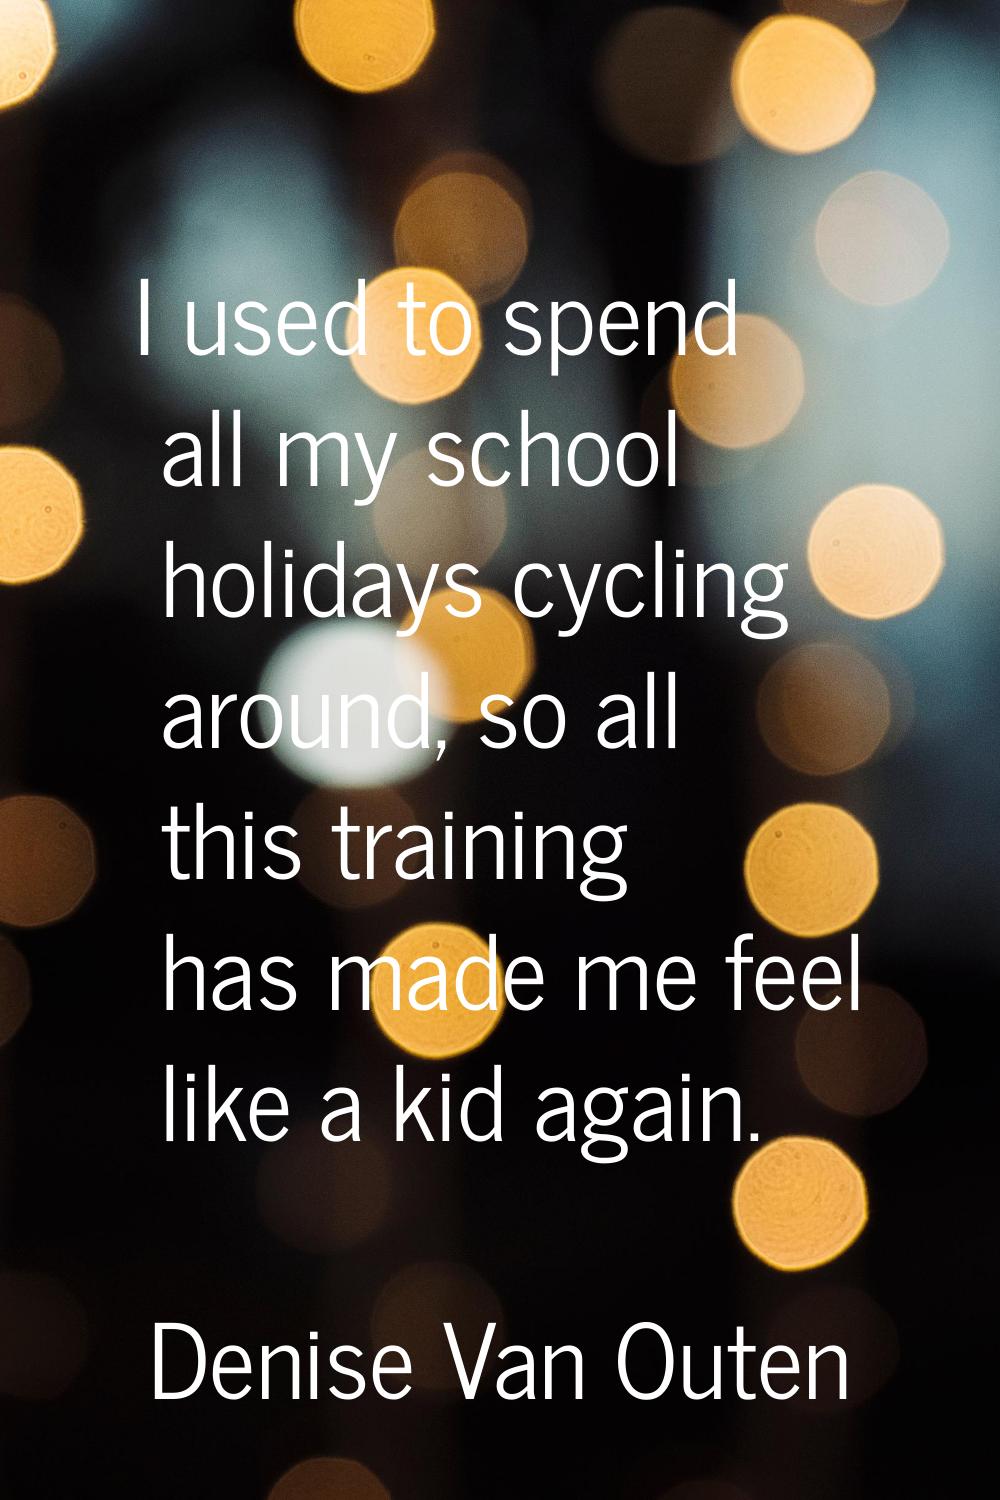 I used to spend all my school holidays cycling around, so all this training has made me feel like a